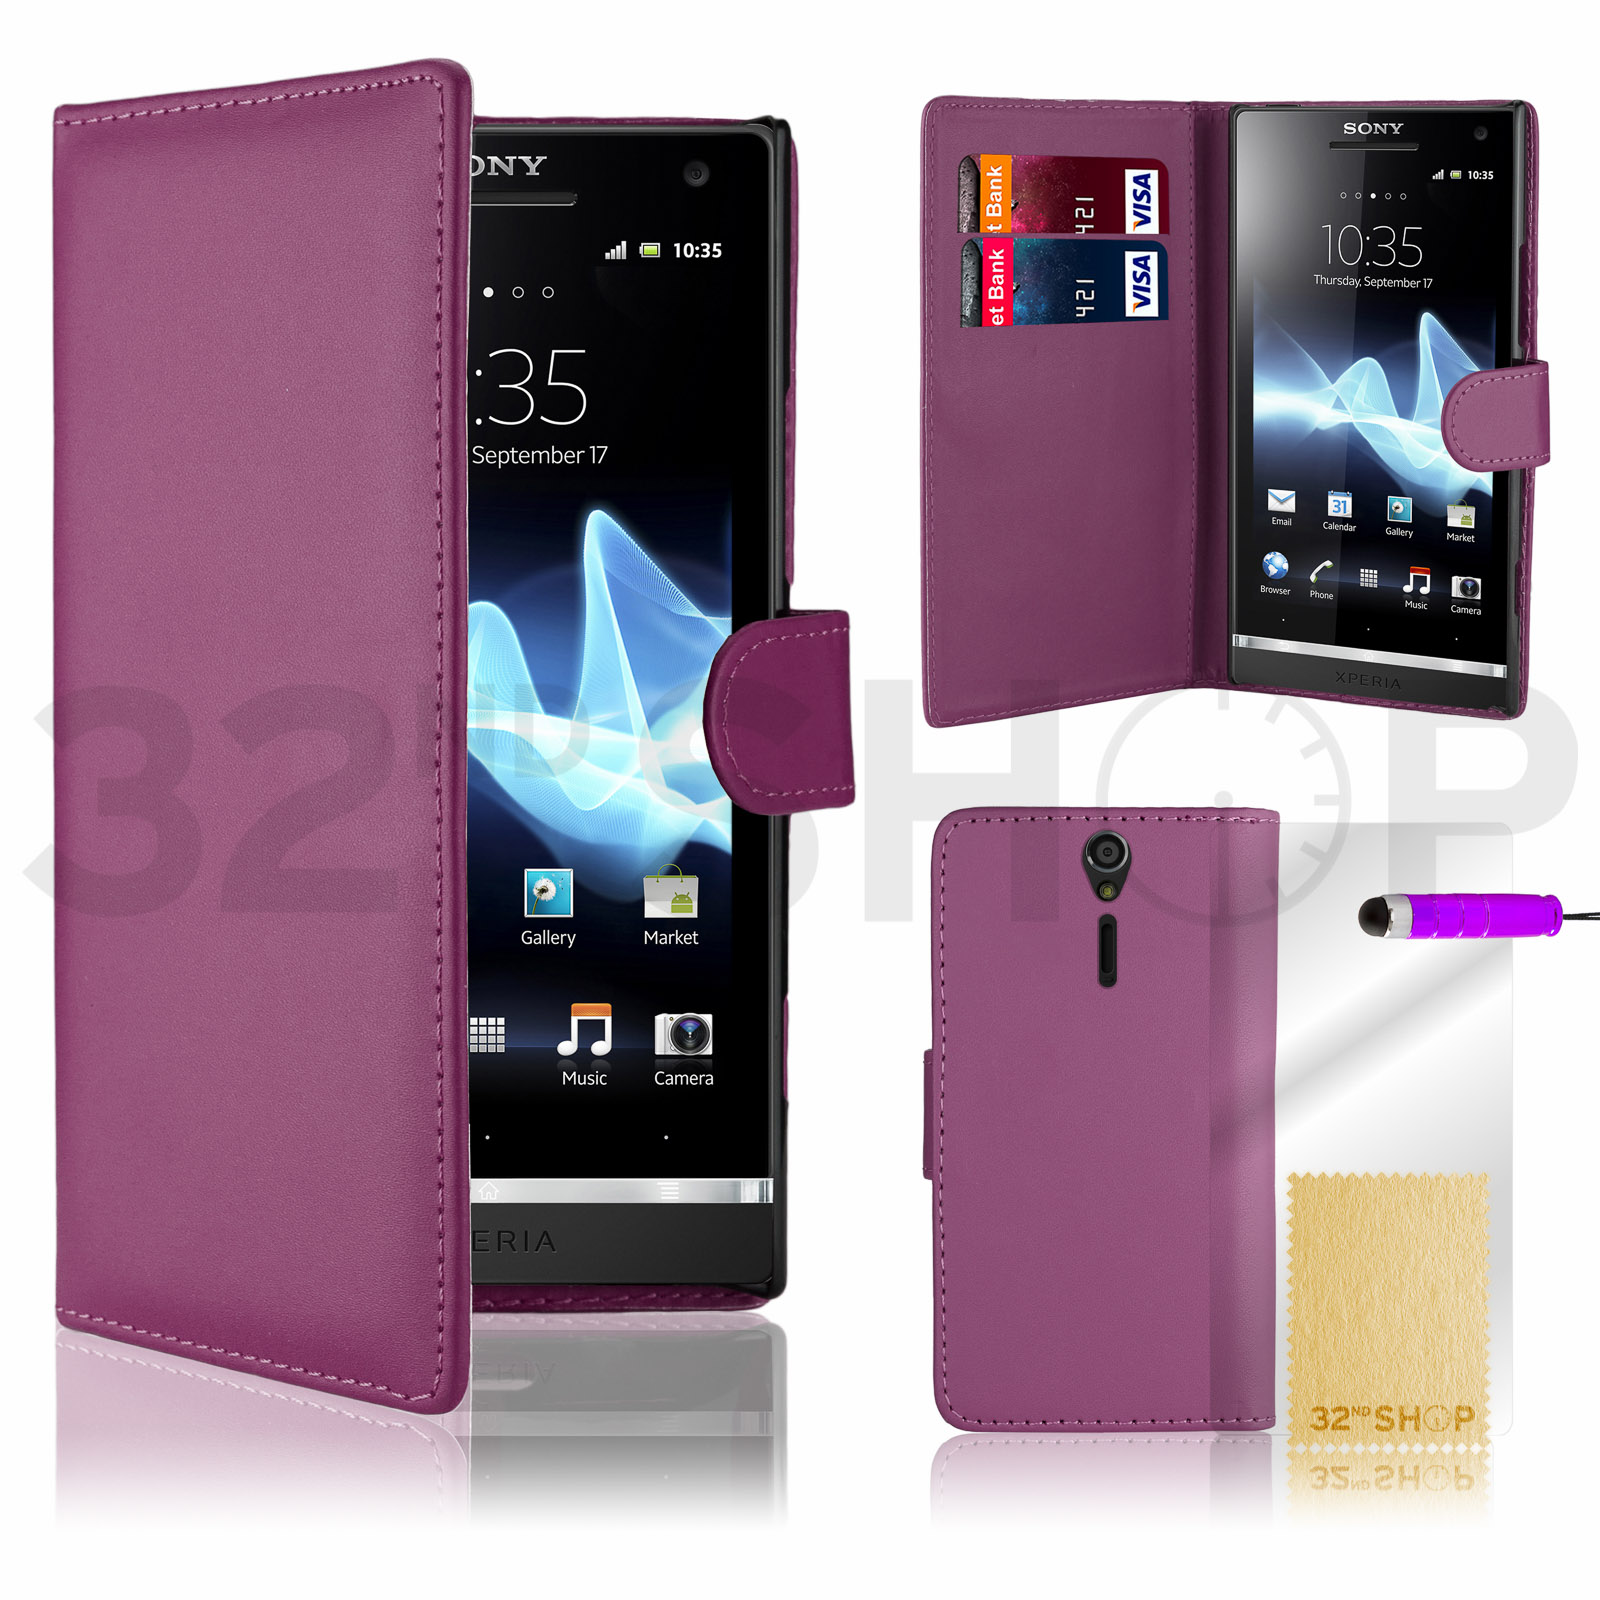 http://www.32ndshop.com/book-wallet-pu-leather-case-cover-for-sony-xperia-t3-purple/